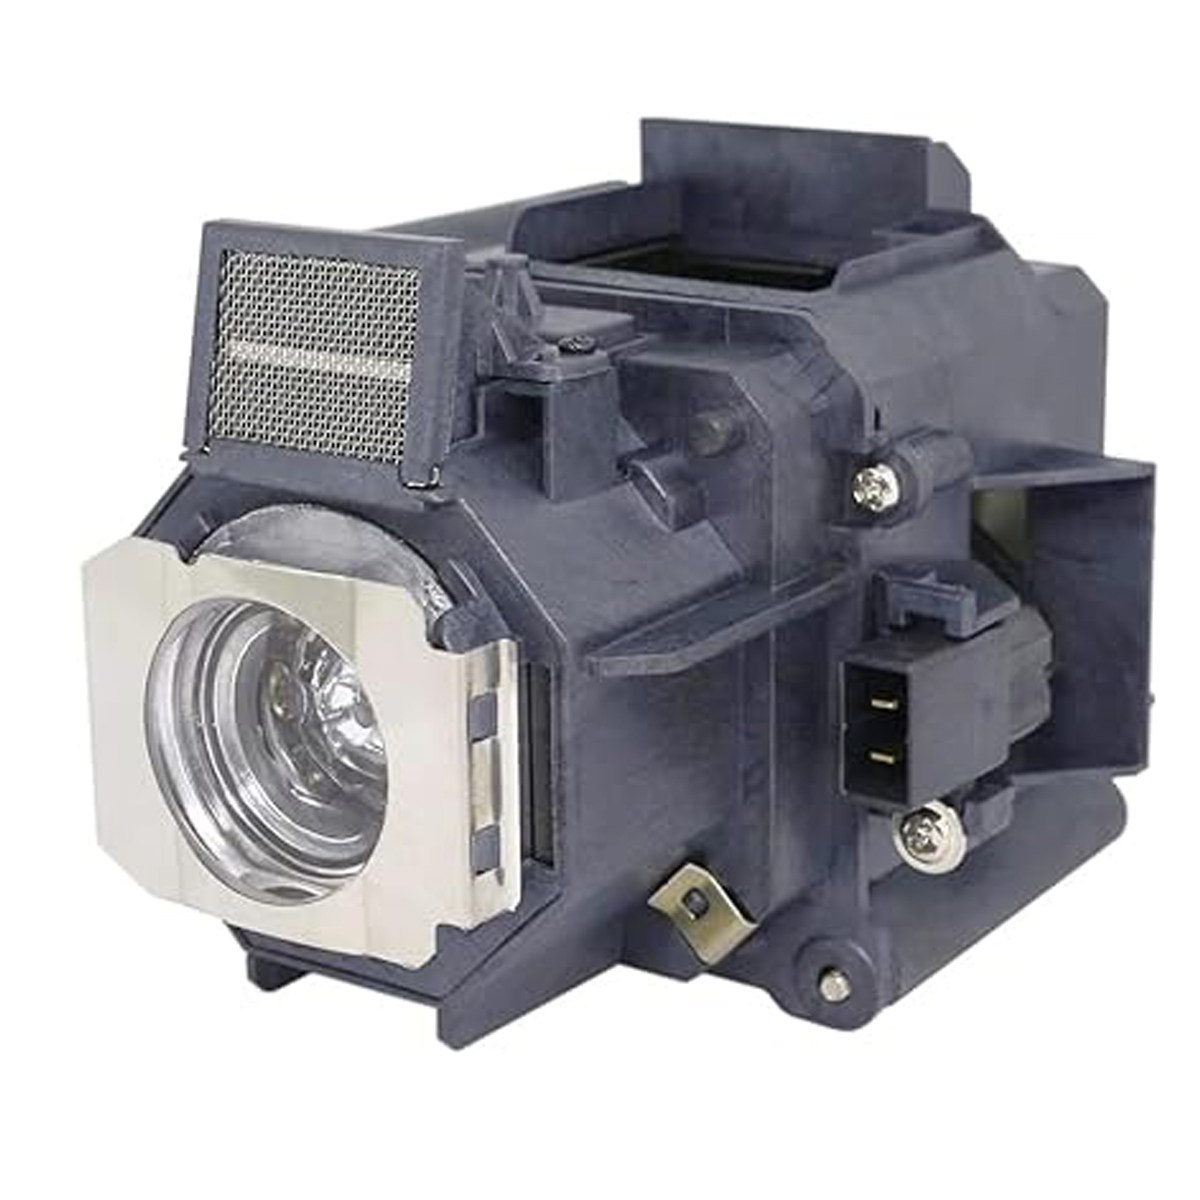 Replacement projector lamp ELPLP63 For EPSON EB-G5800 EB-G5900 EB-G5950